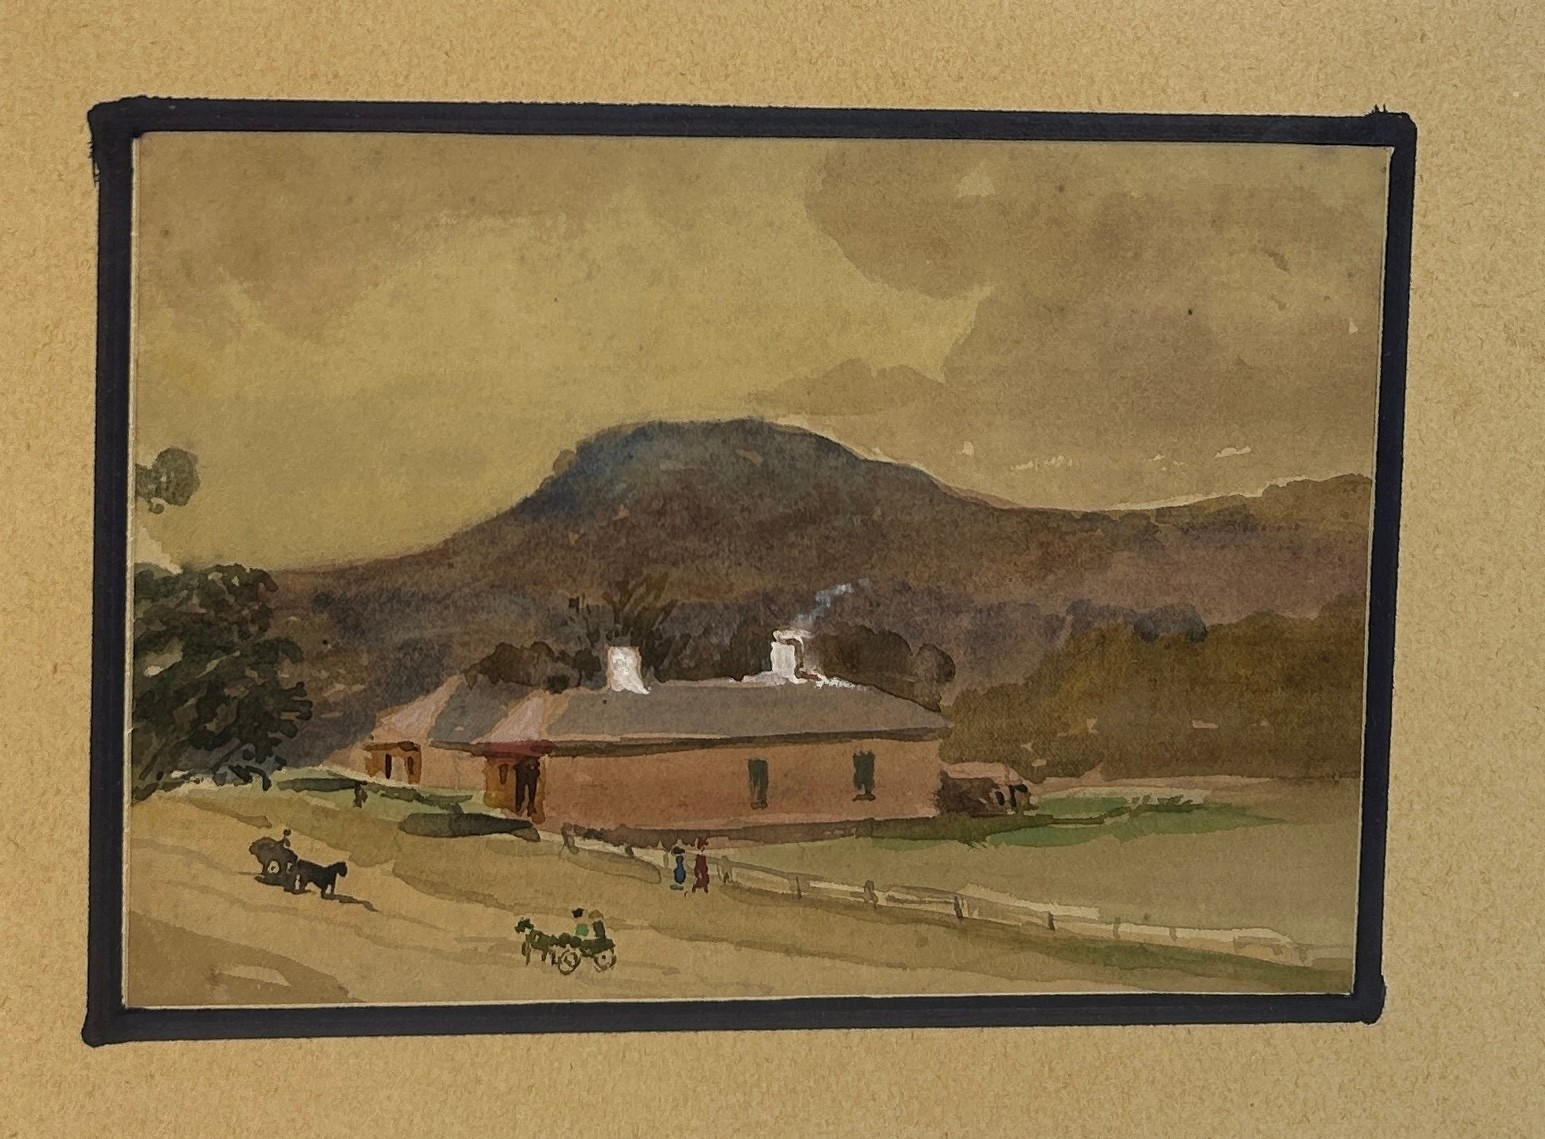 A 19TH CENTURY WATERCOLOUR PAINTING ON PAPER DEPICTING AN AUSTRALIAN SUBJECT POSSIBLY BATEMAN'S - Image 3 of 5